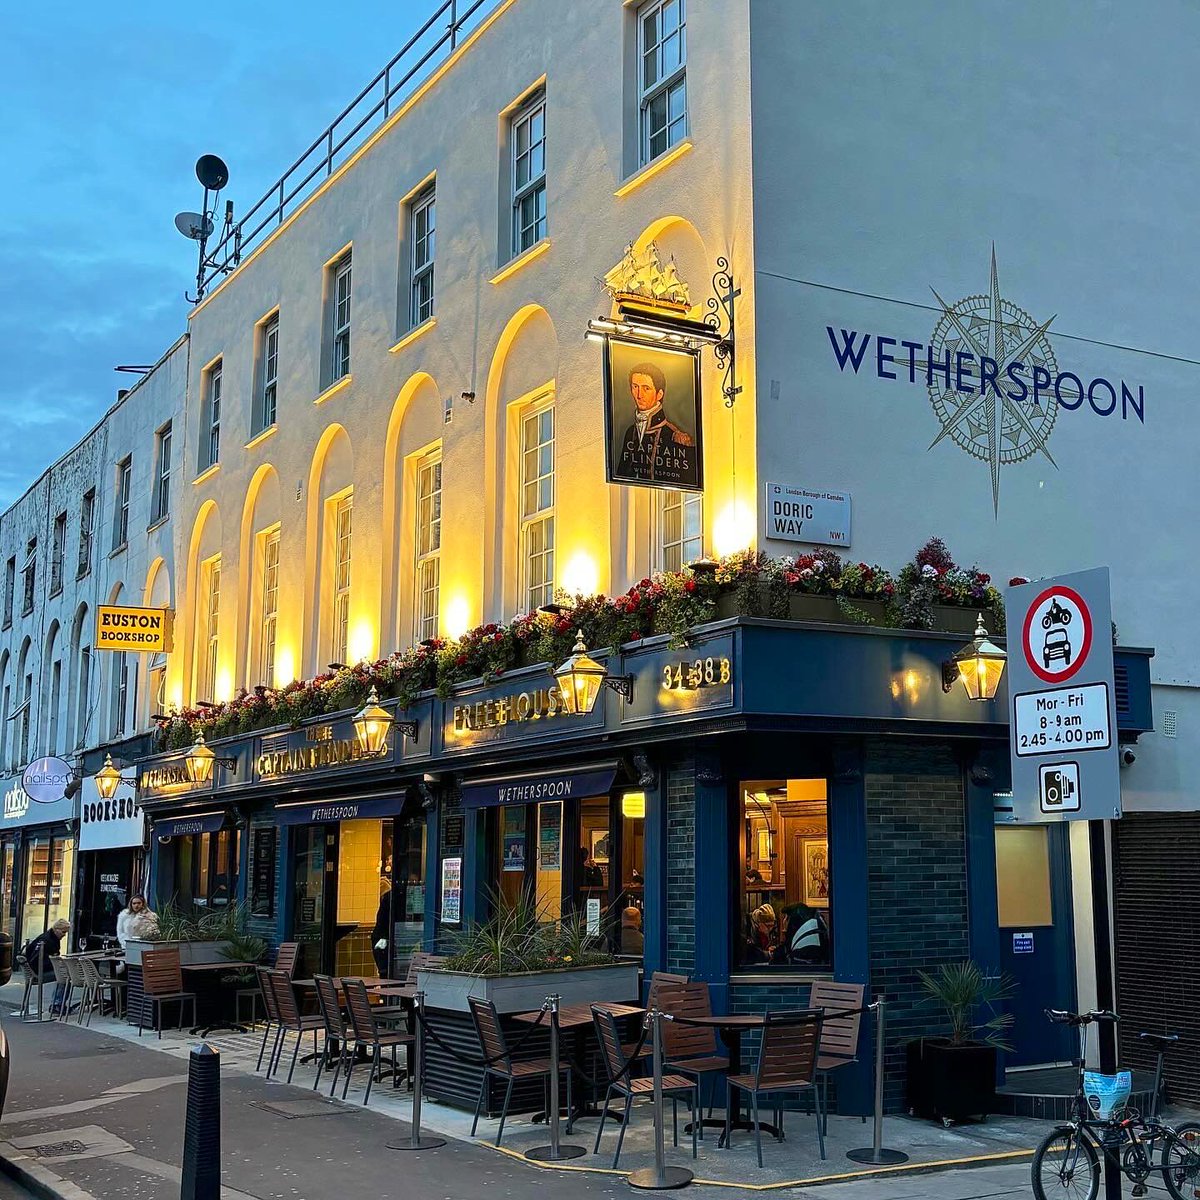 The Captain Flinders 
📍 34-38 Eversholt St,  London NW1 1DA
🚇 Euston
🍺 £5.21 Carlsberg 

A Newish Spoons.

#londonpubs #pub #euston #camden #carlsberg #spoons #captainflinders #wetherspoons

Full feature on Instagram and Facebook, link in bio. 🍻